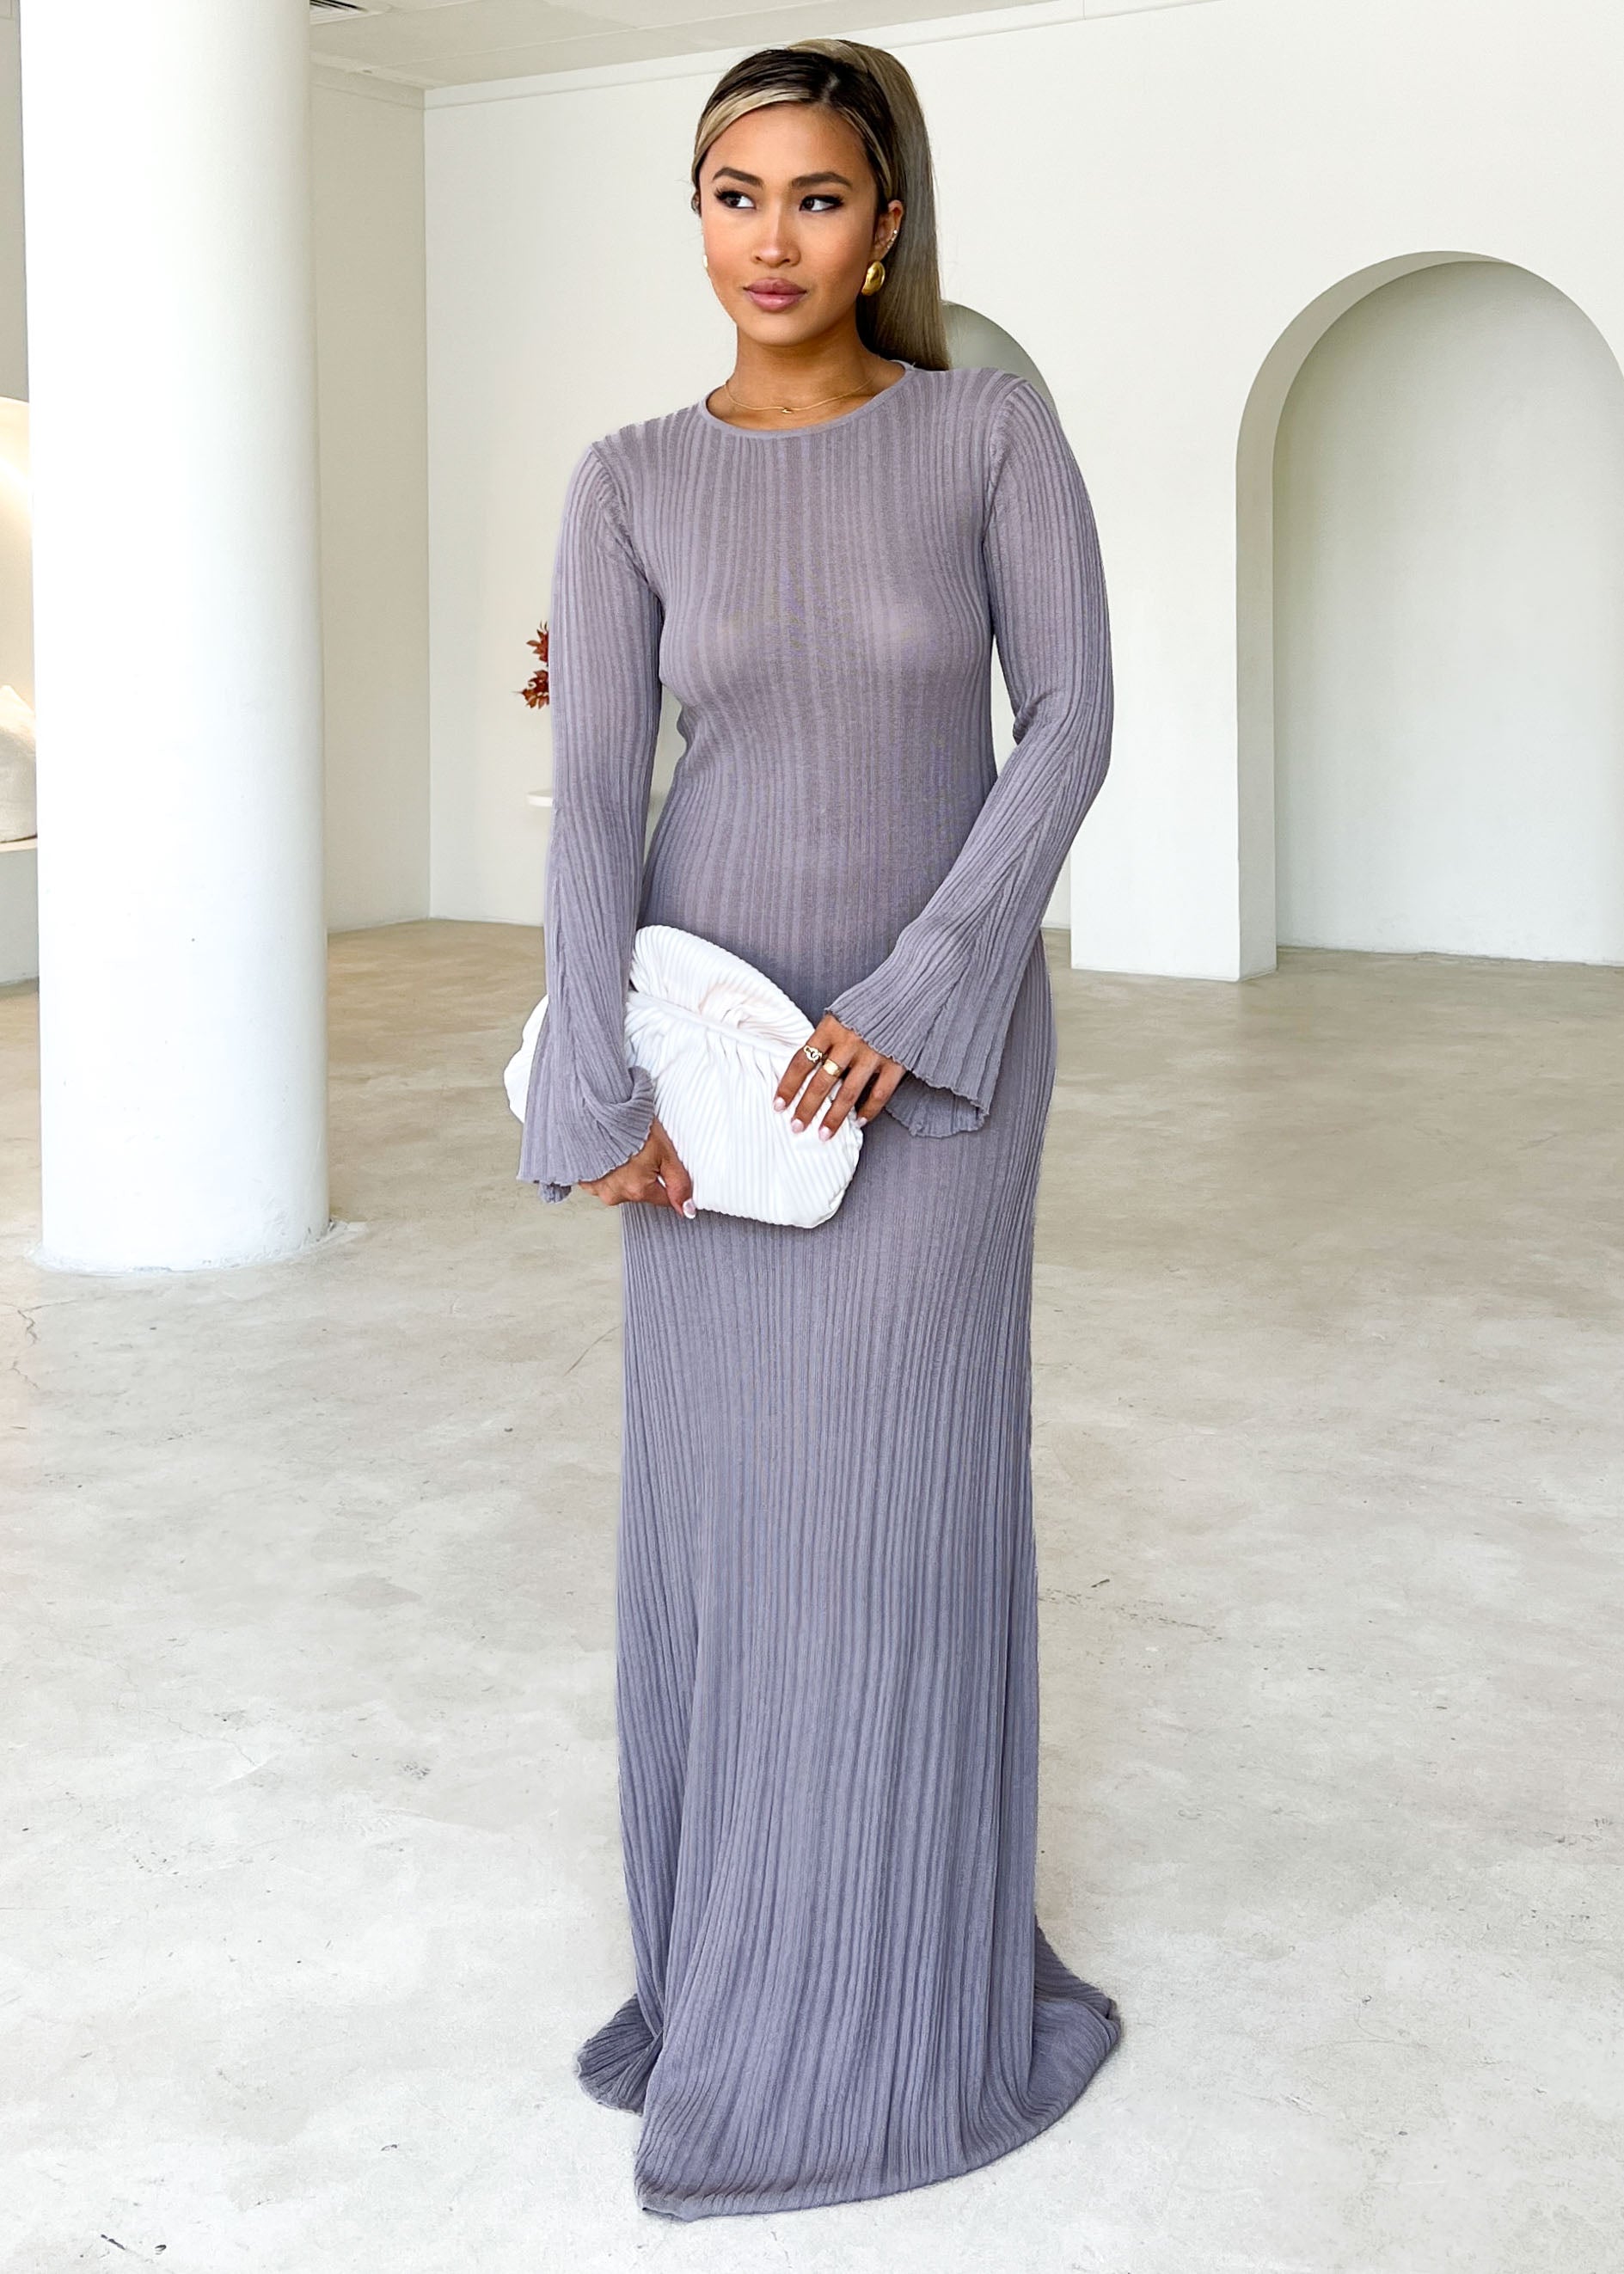 Grey Bridesmaid Dress Style Guide - Ever-Pretty US